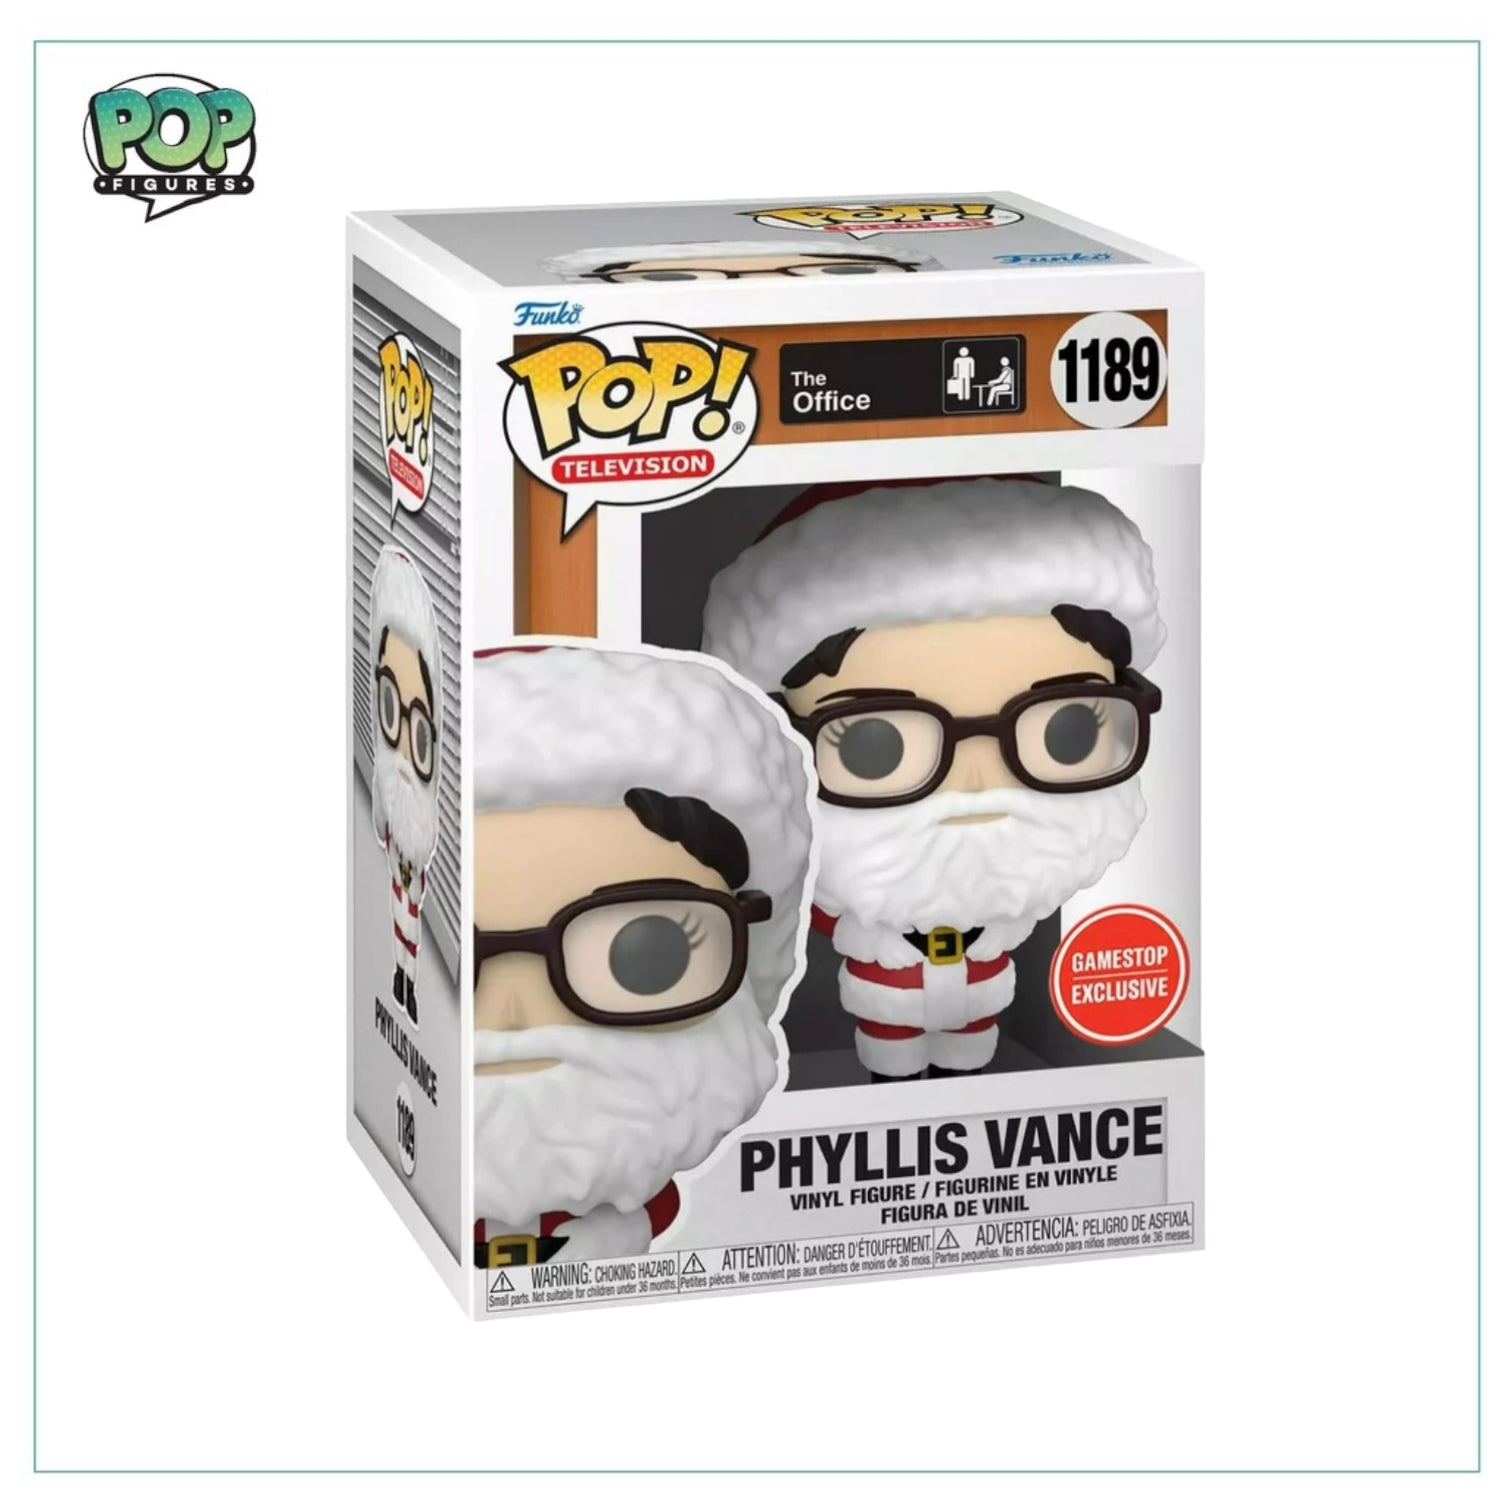 Phyllis Vance #1189 Funko Pop! - The Office - GameStop Exclusive - Angry Cat